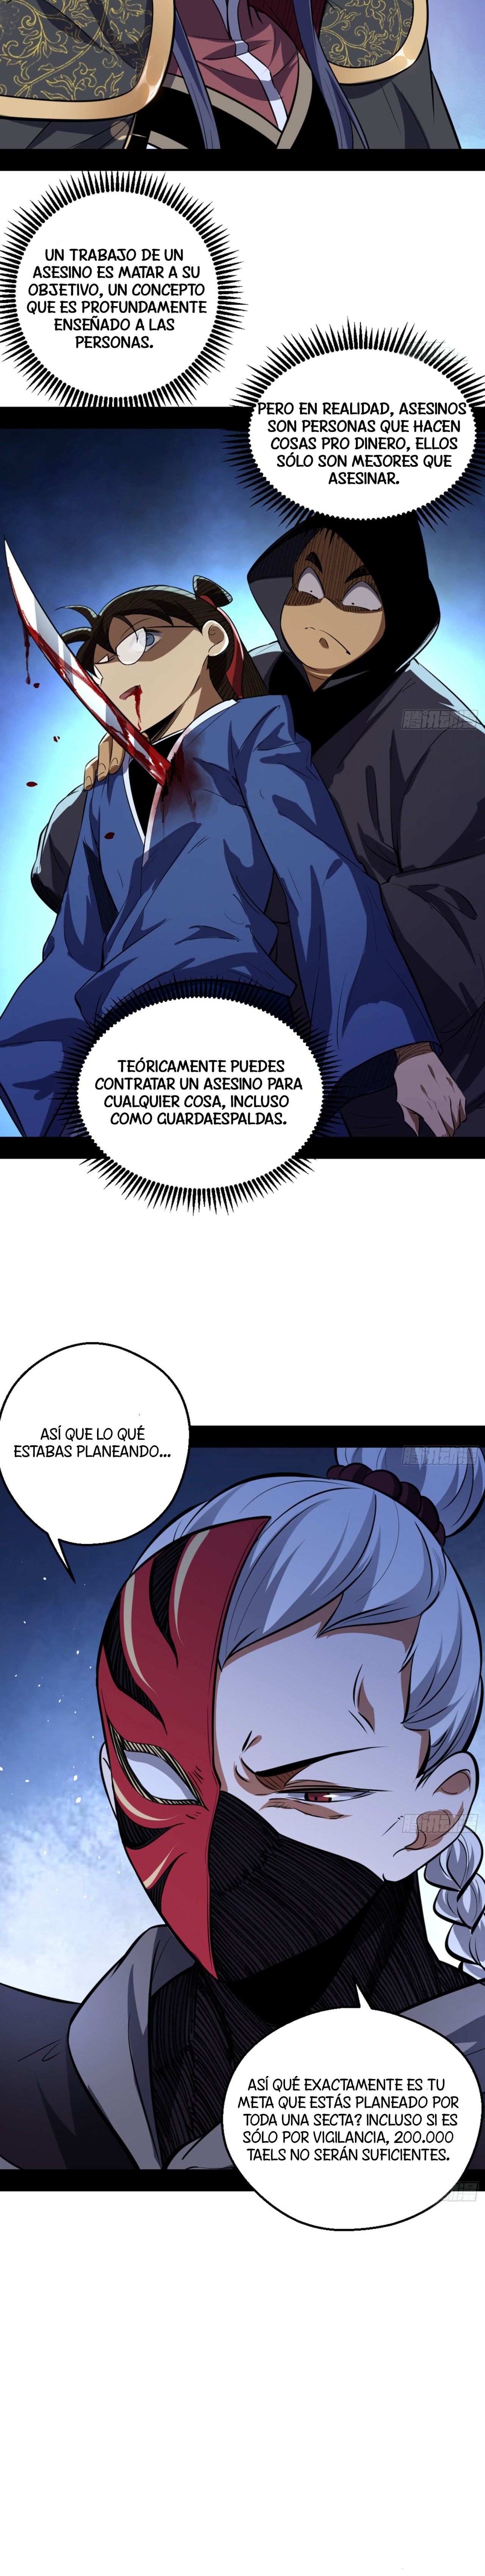 Manga Soy un dios maligno Chapter 42 image number 7